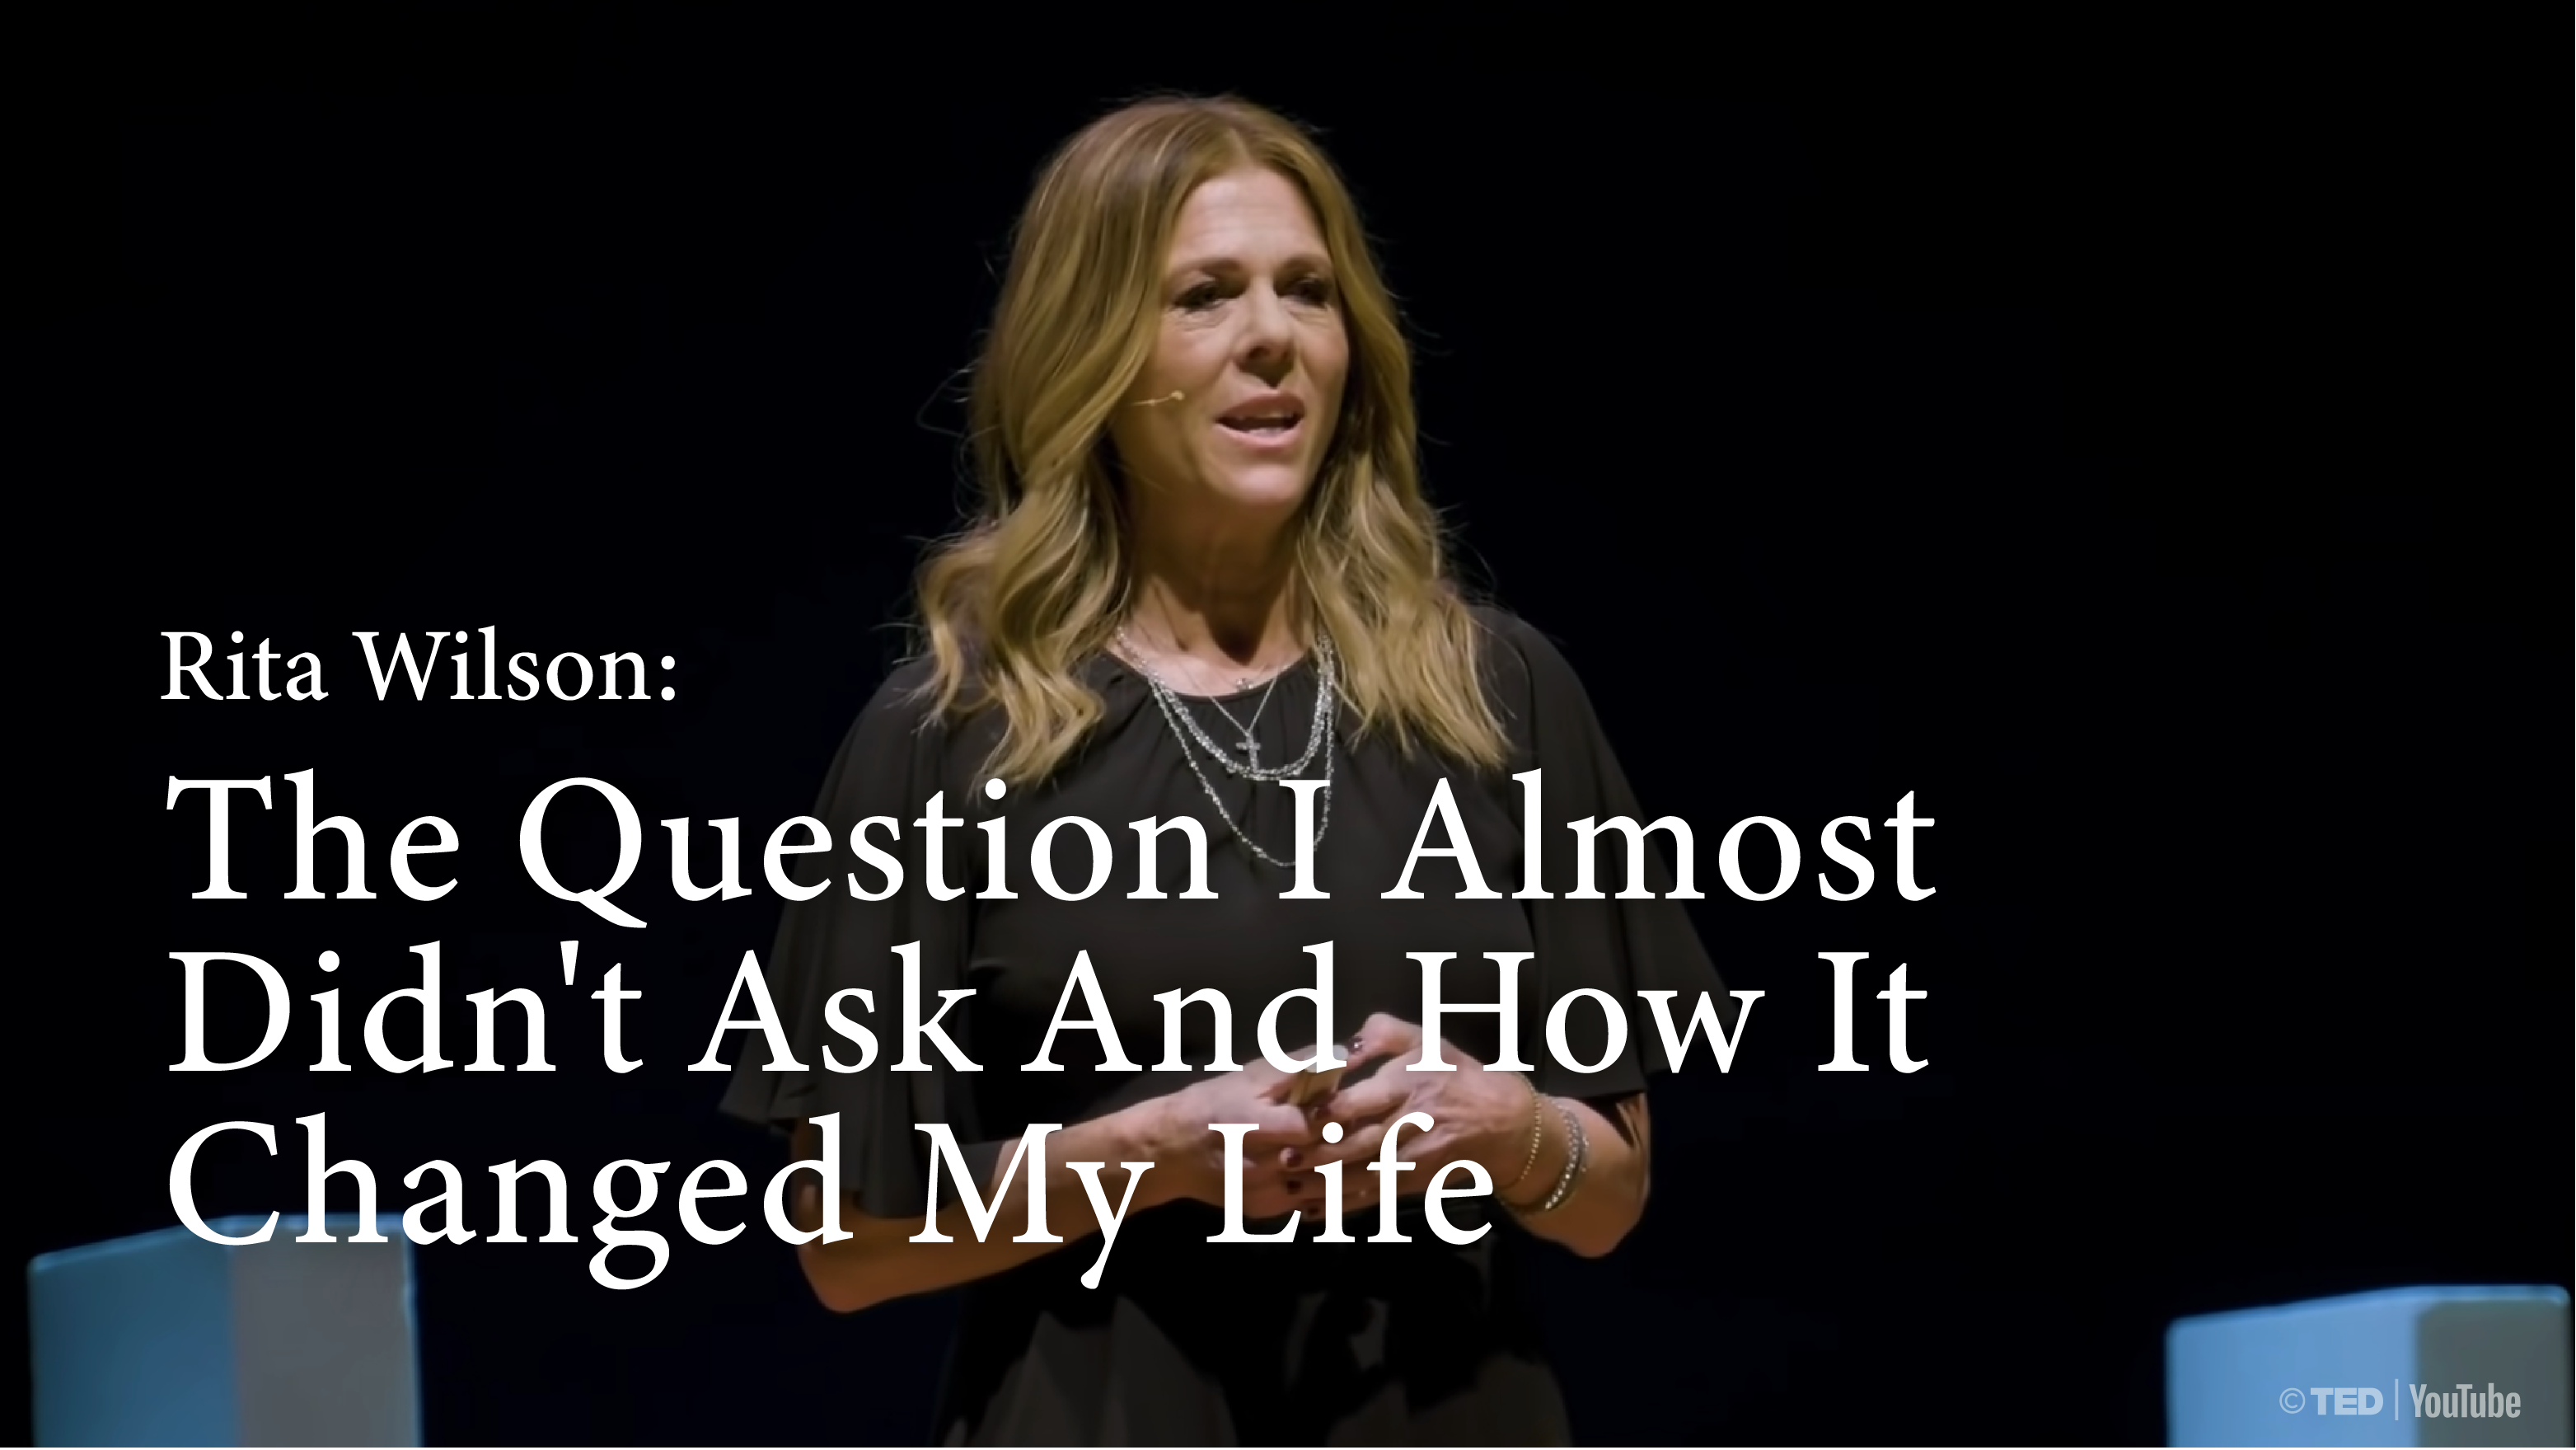 [B] The Question I Almost Didn't Ask And How It Changed My Life | Rita Wilson [PRACTICE]